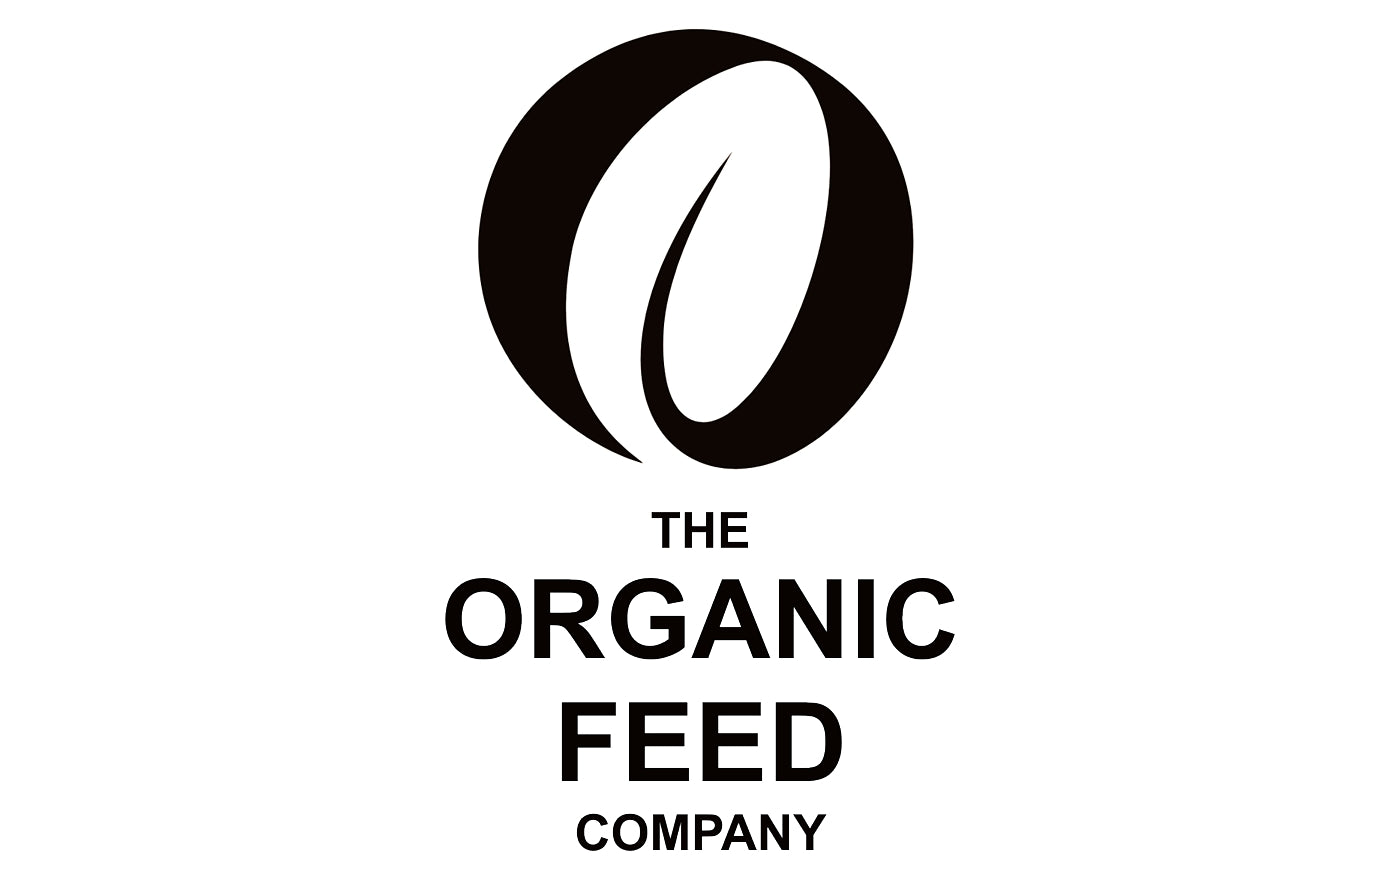 The Organic Feed Co. - Organic Mixed Corn 20kg - Buy Online SPR Centre UK